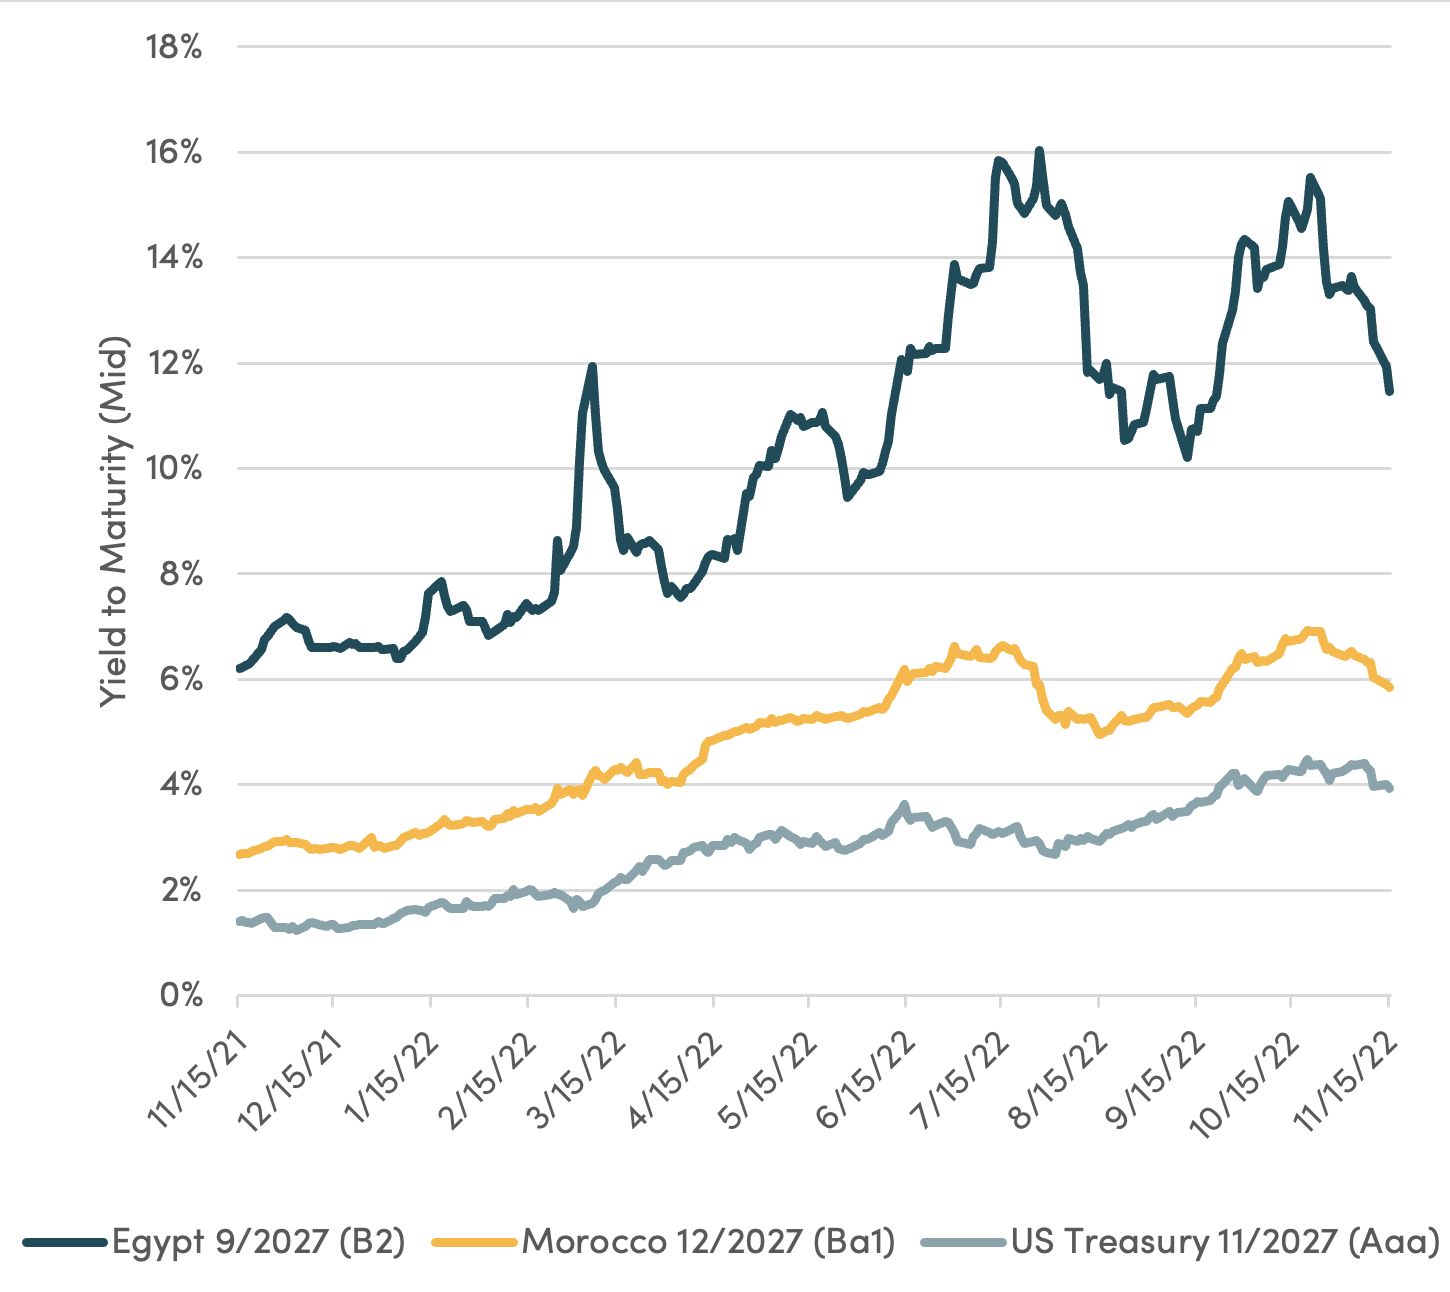 Chart showing yields for Egypt and Morocco vs. US treasuries